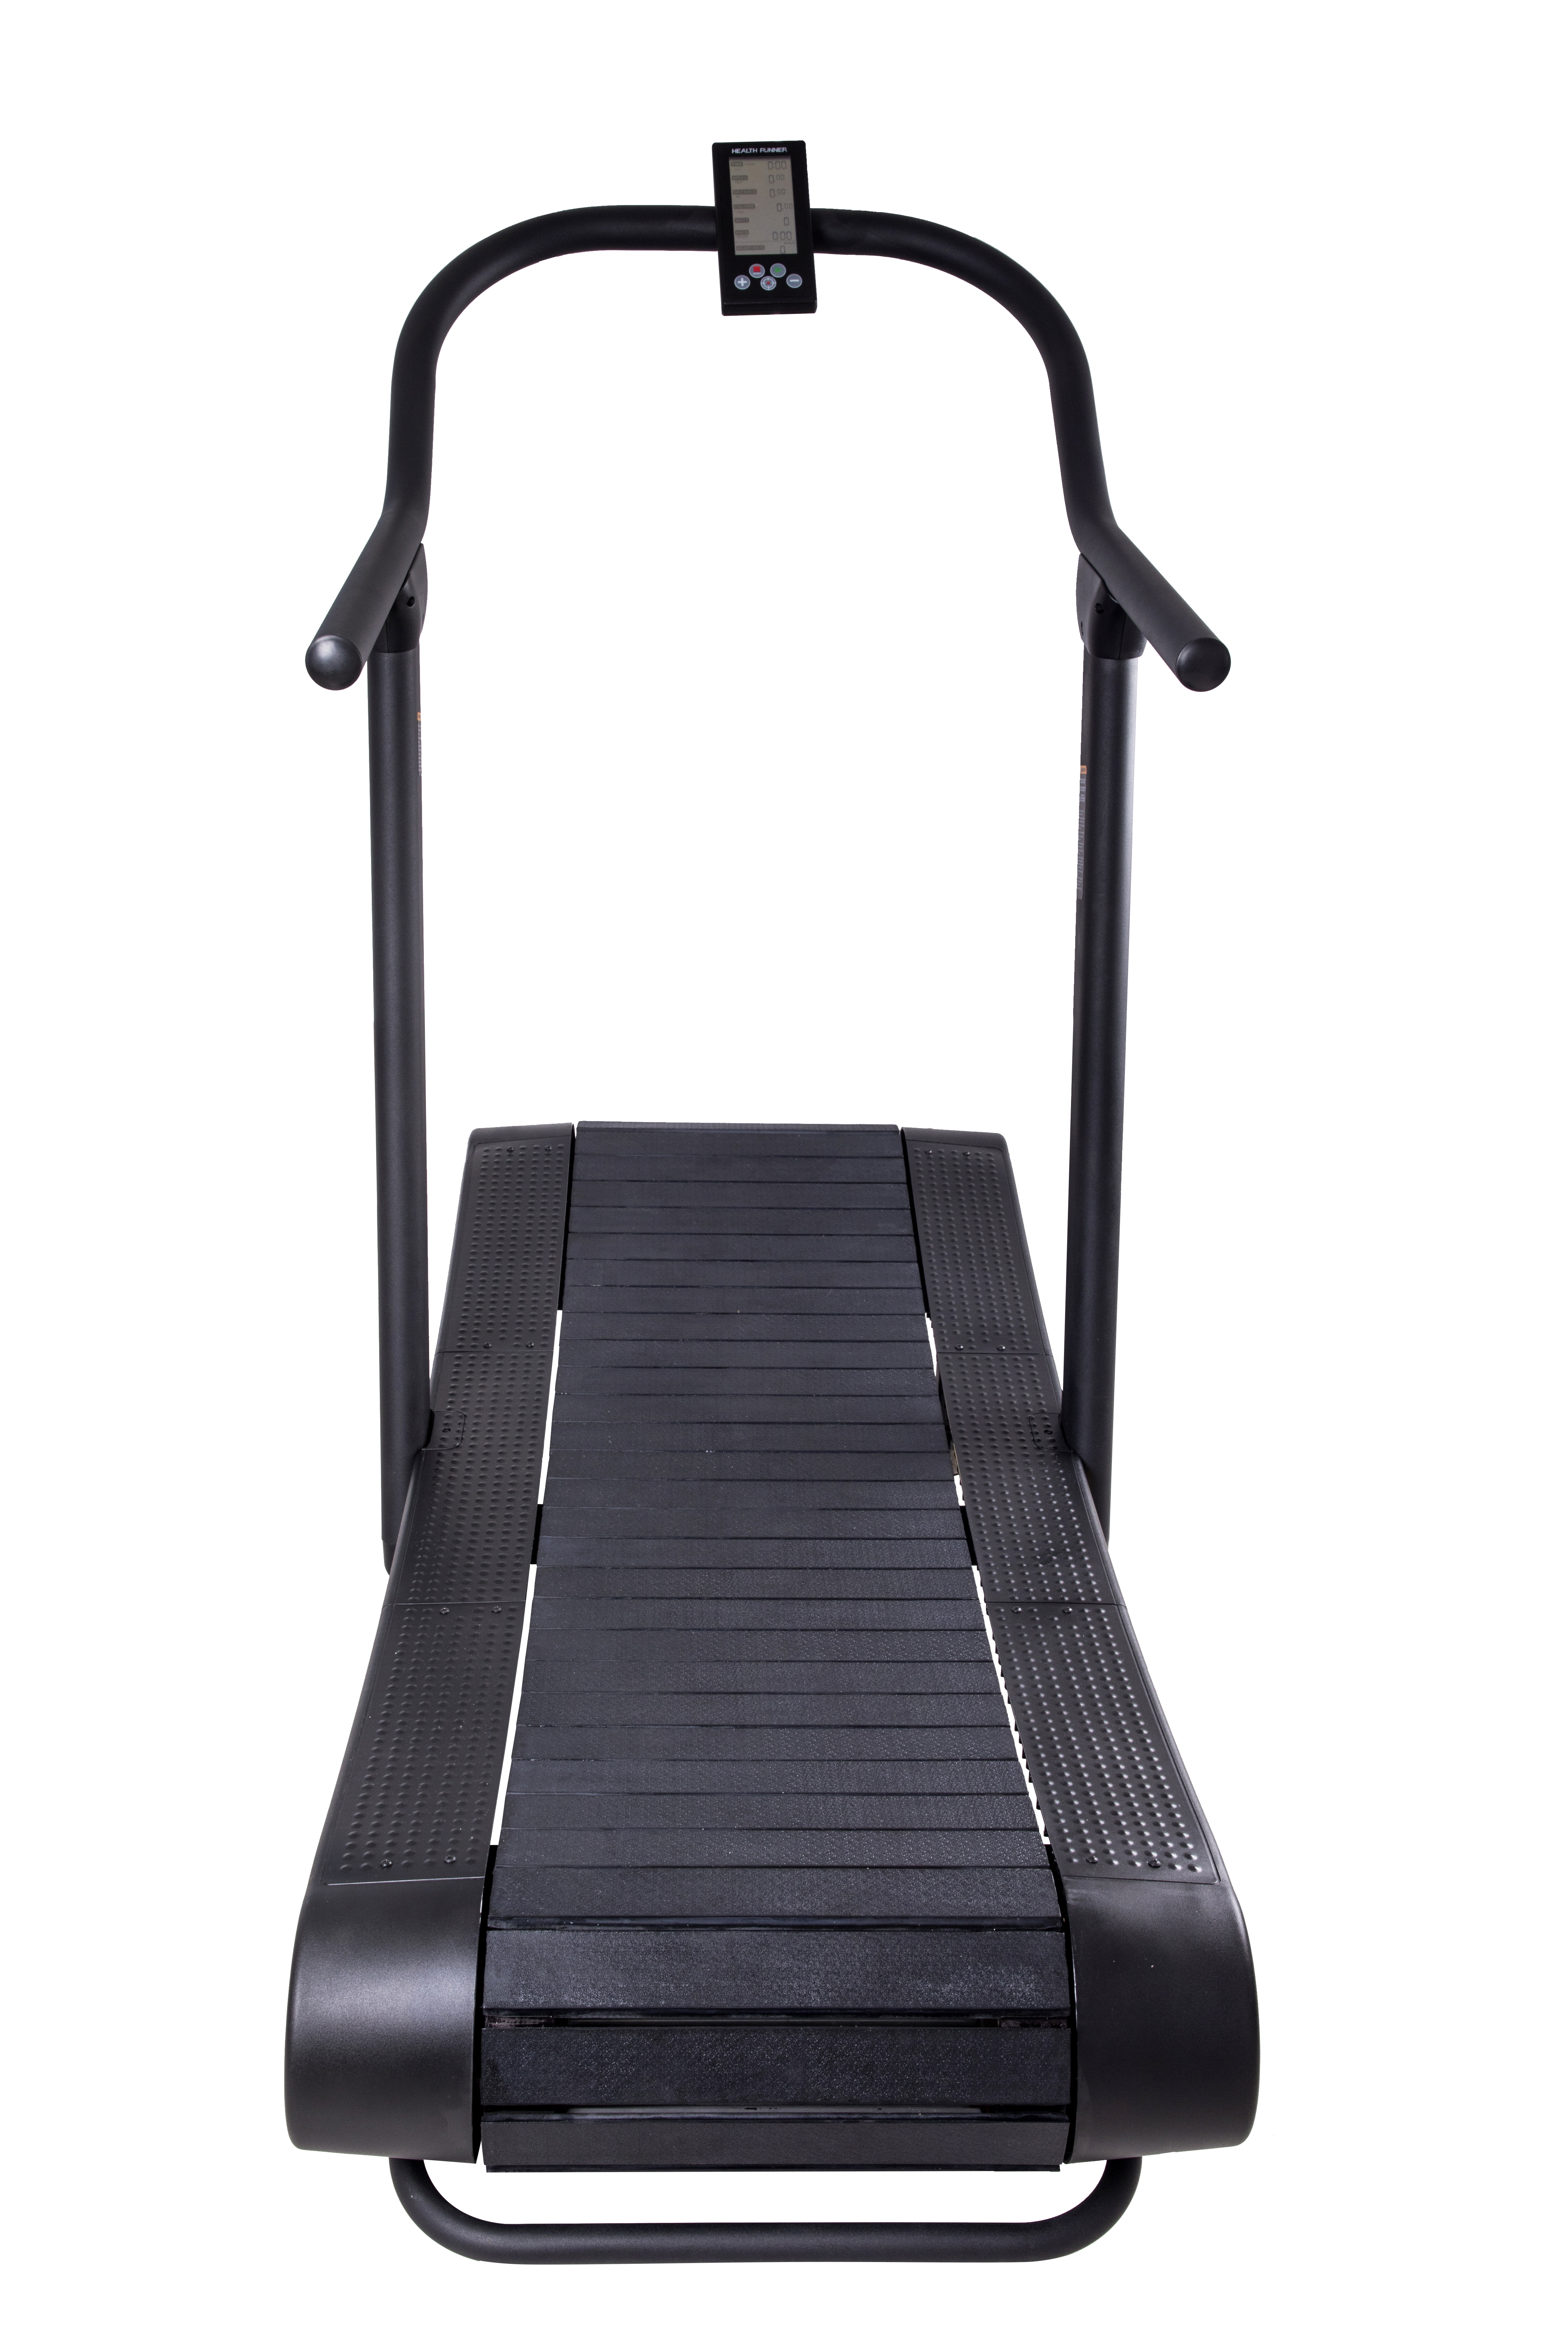 Motorless Durable Community Commercial Curved Treadmill